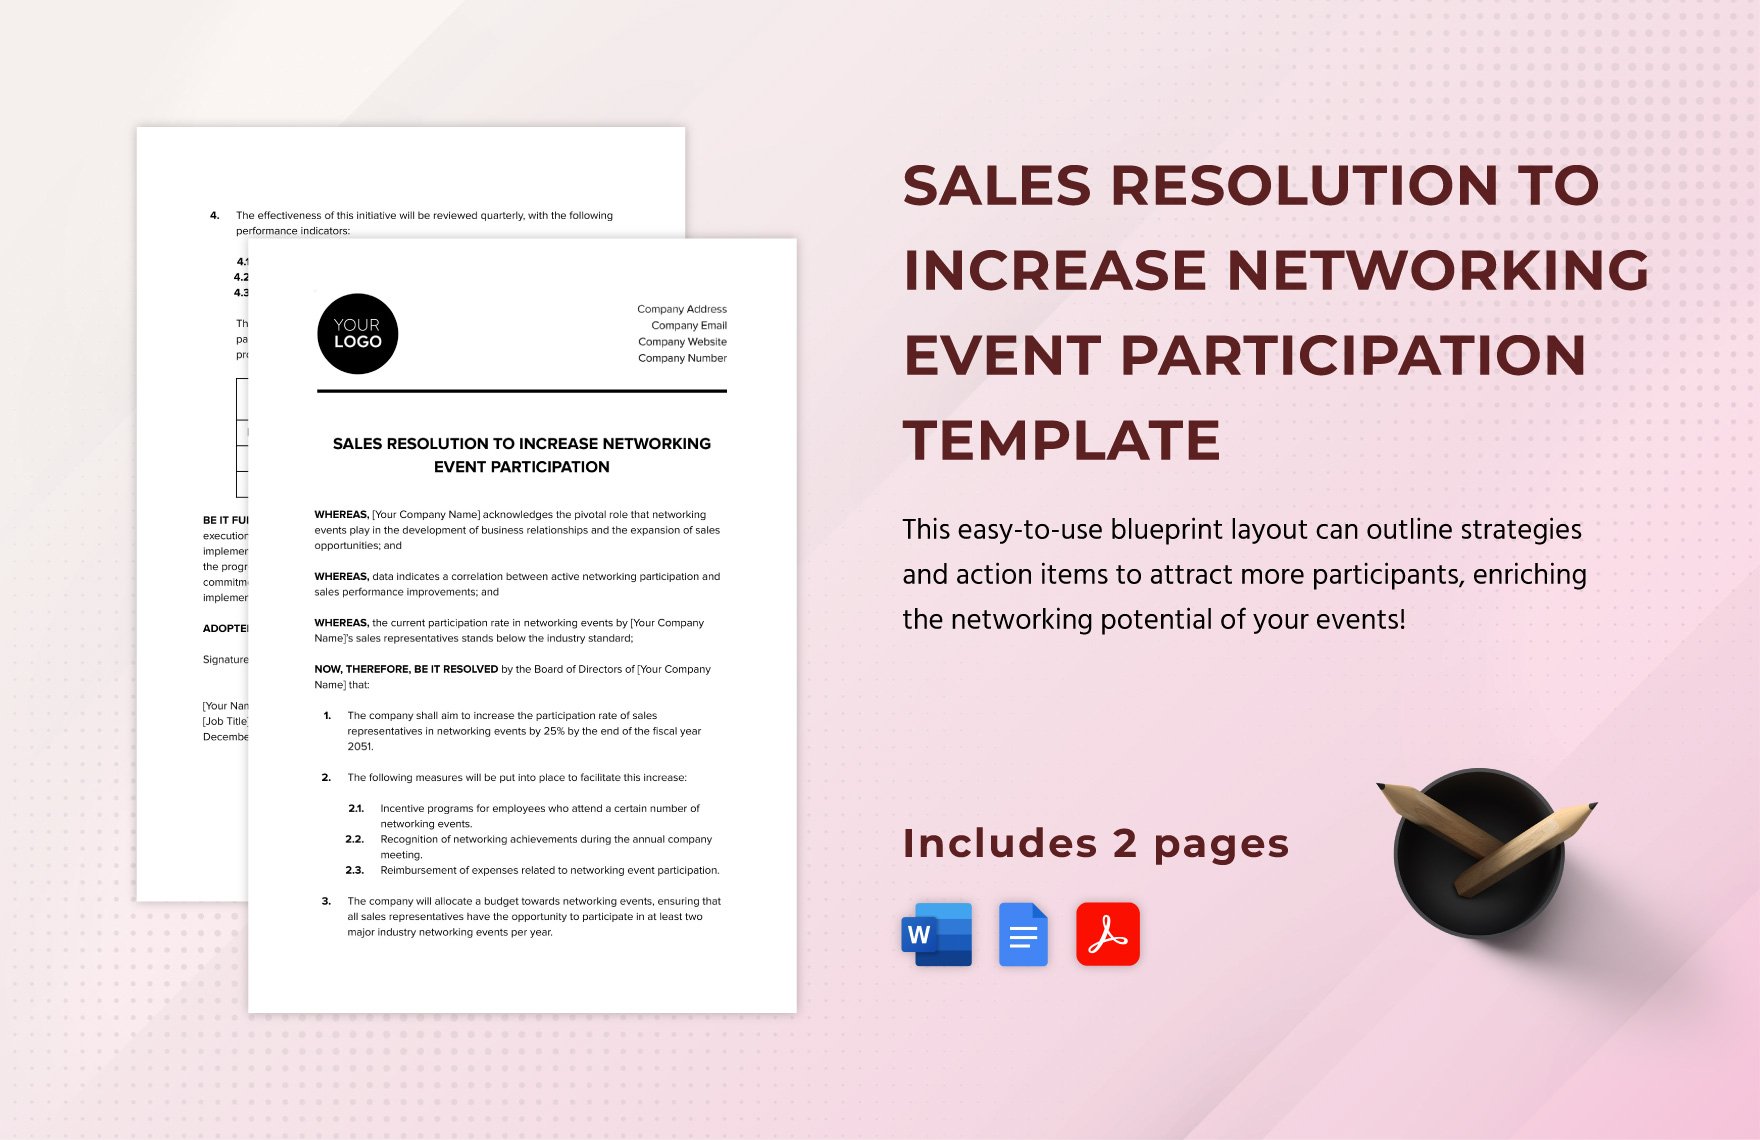 Sales Resolution to Increase Networking Event Participation Template